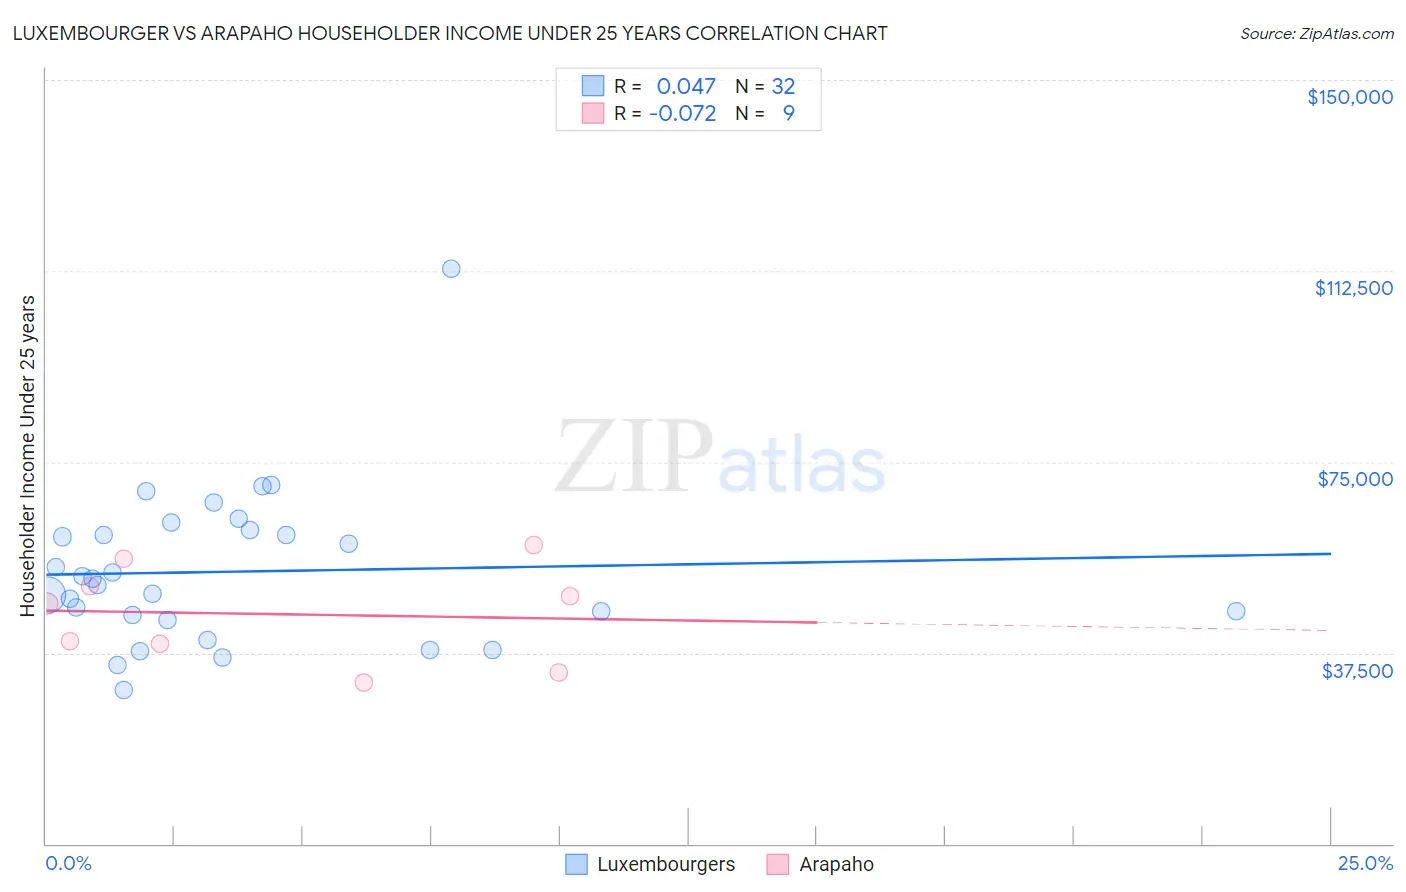 Luxembourger vs Arapaho Householder Income Under 25 years